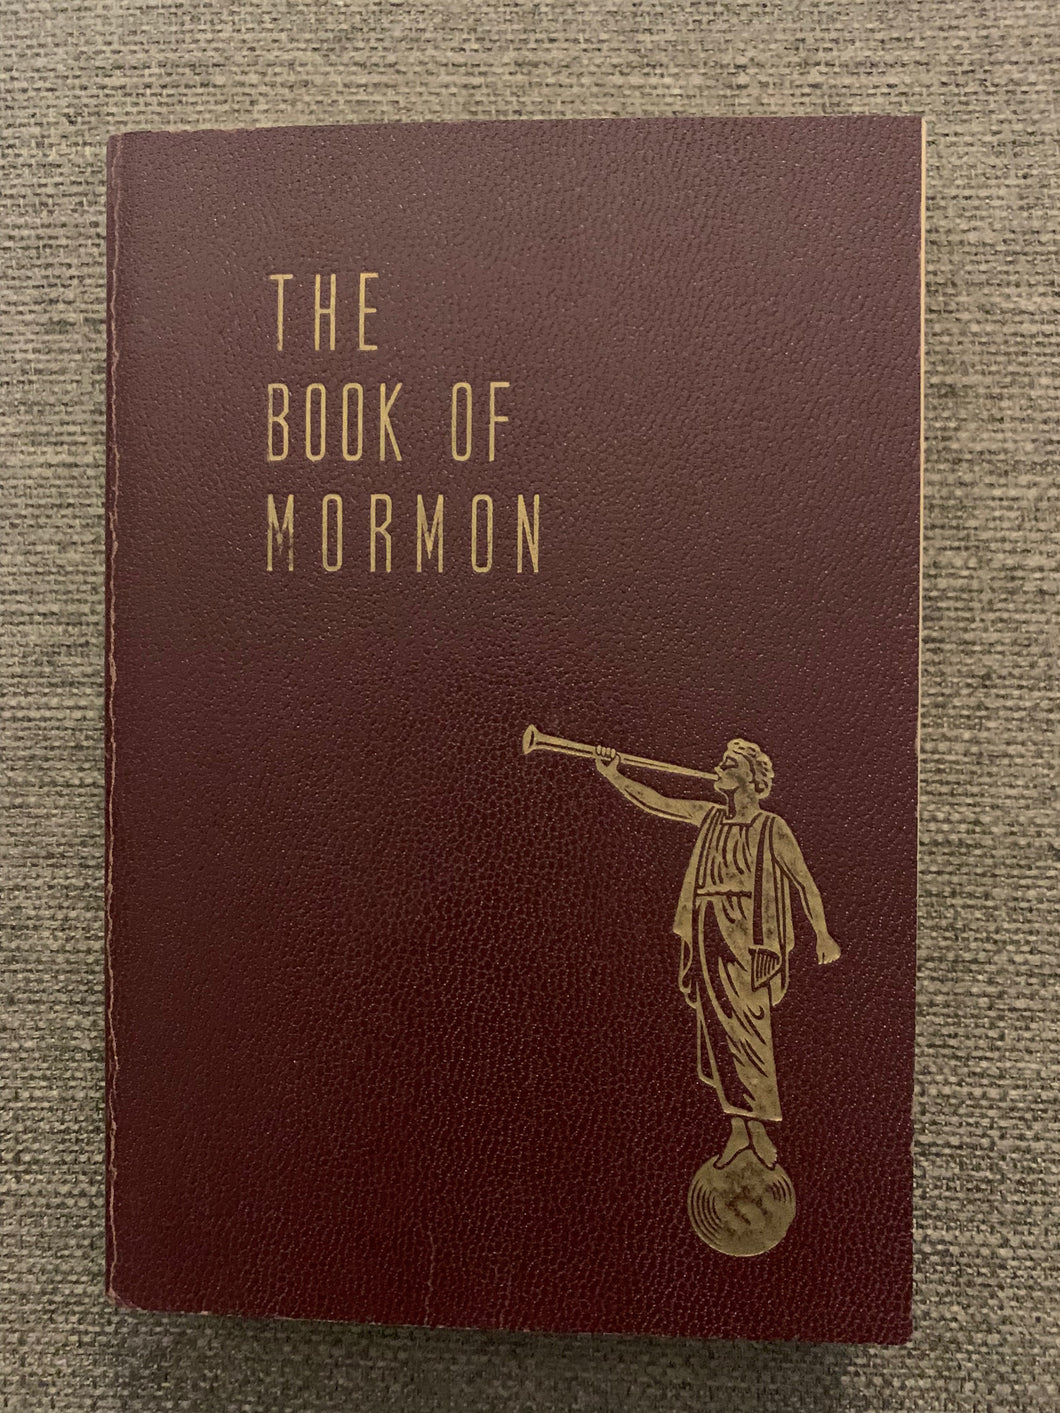 The Book of Mormon: Another Testament of Jesus Christ by Joseph Smith